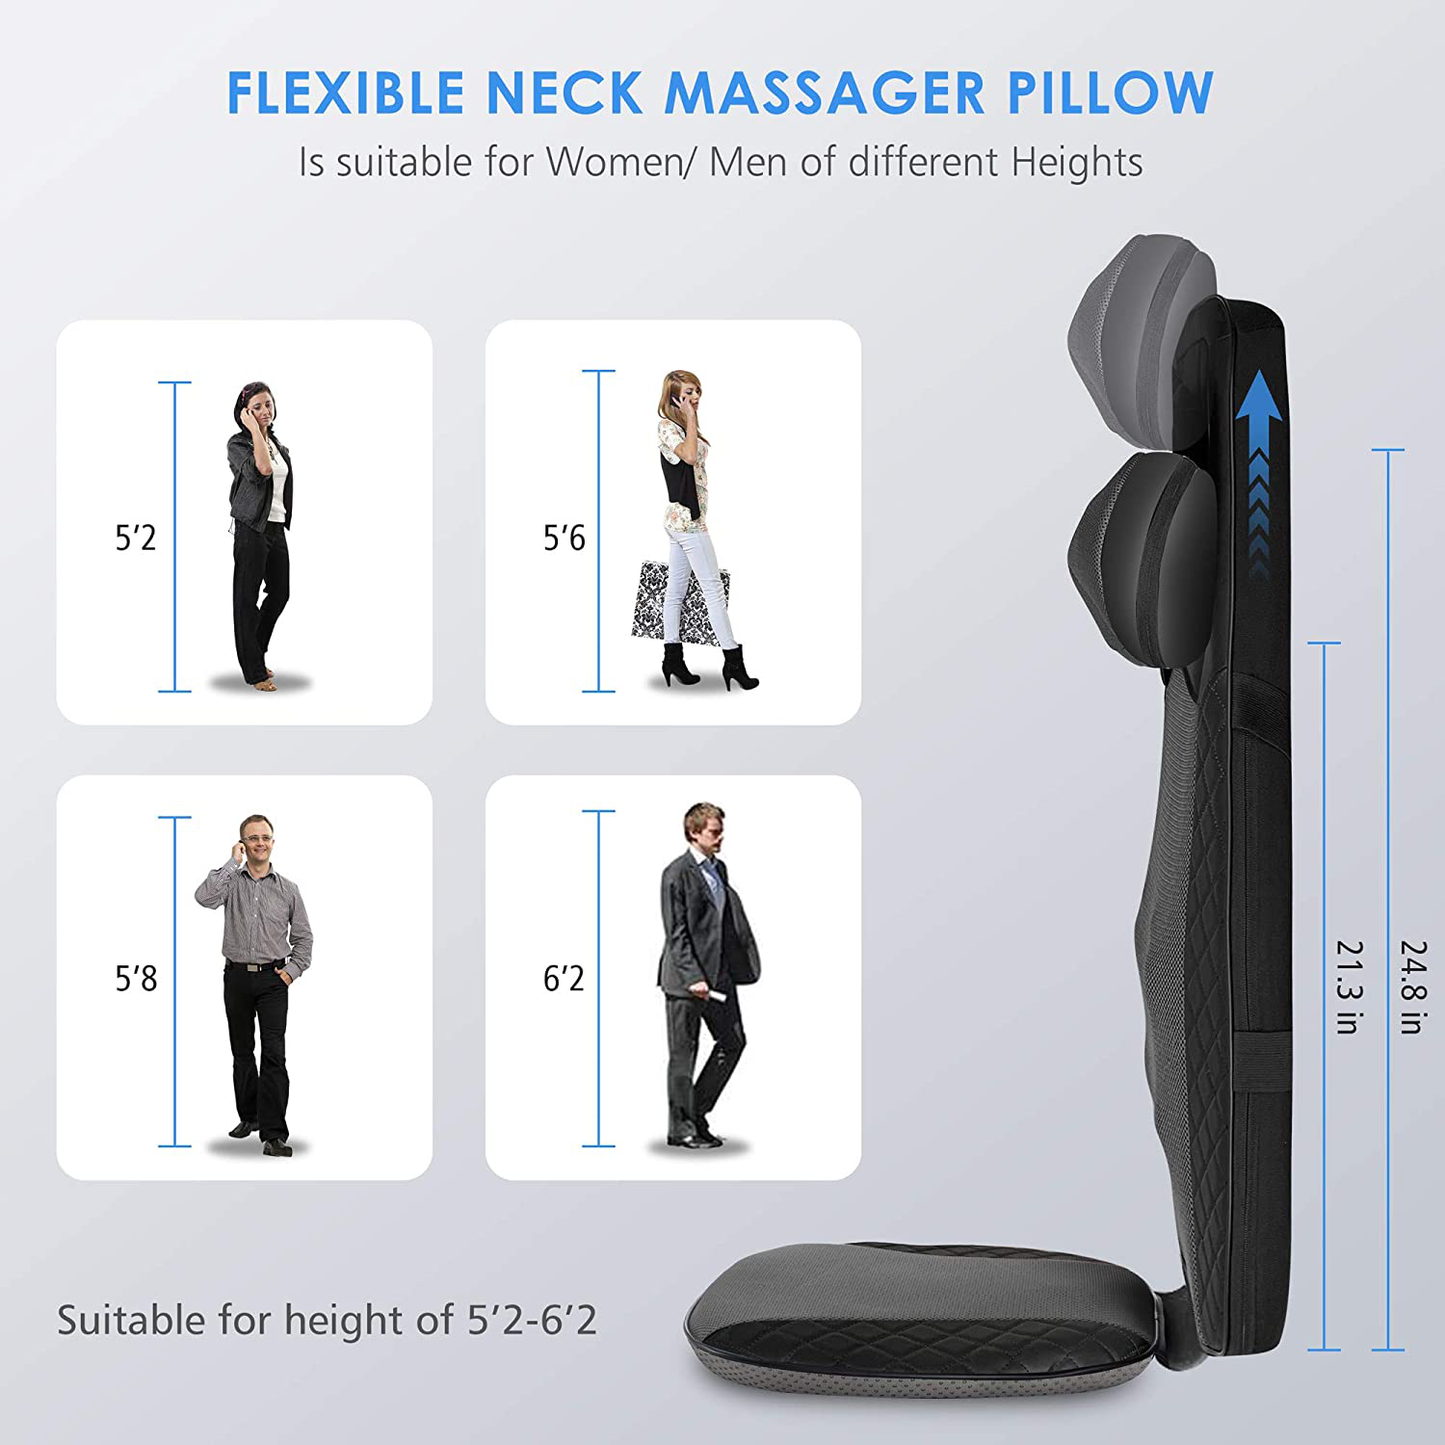 Comfier Shiatsu Neck & Back Massager with Heat, Massagers for Neck and Back Deep Tissue,Adjustable Shiatsu Nodes,Full Body Massage Chair Pad for Office,Home,Gifts for Mom,Dad